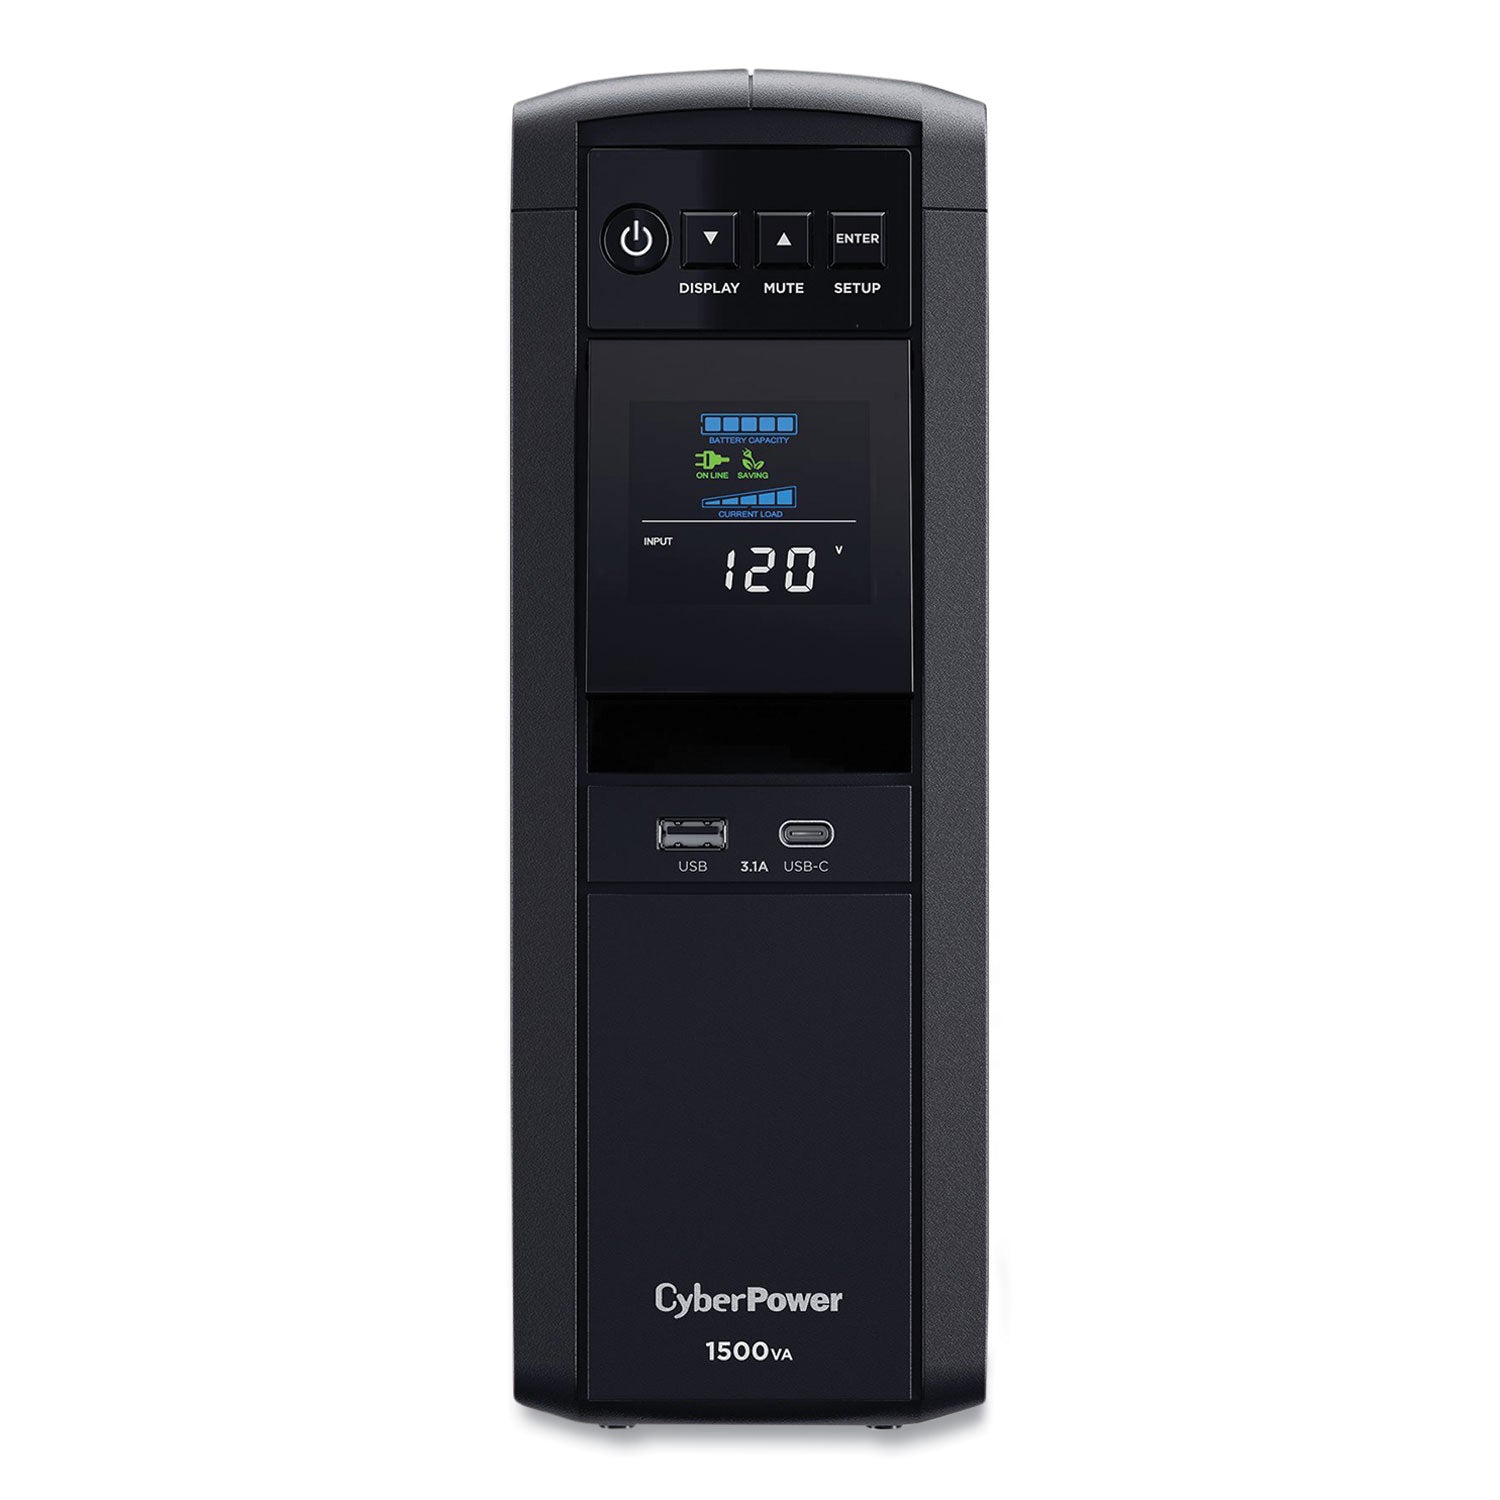 pfc-sinewave-cp1500pfclcd-ups-battery-backup-12-outlets-1500-va-1030-j_cypcp1500pfclcd - 1